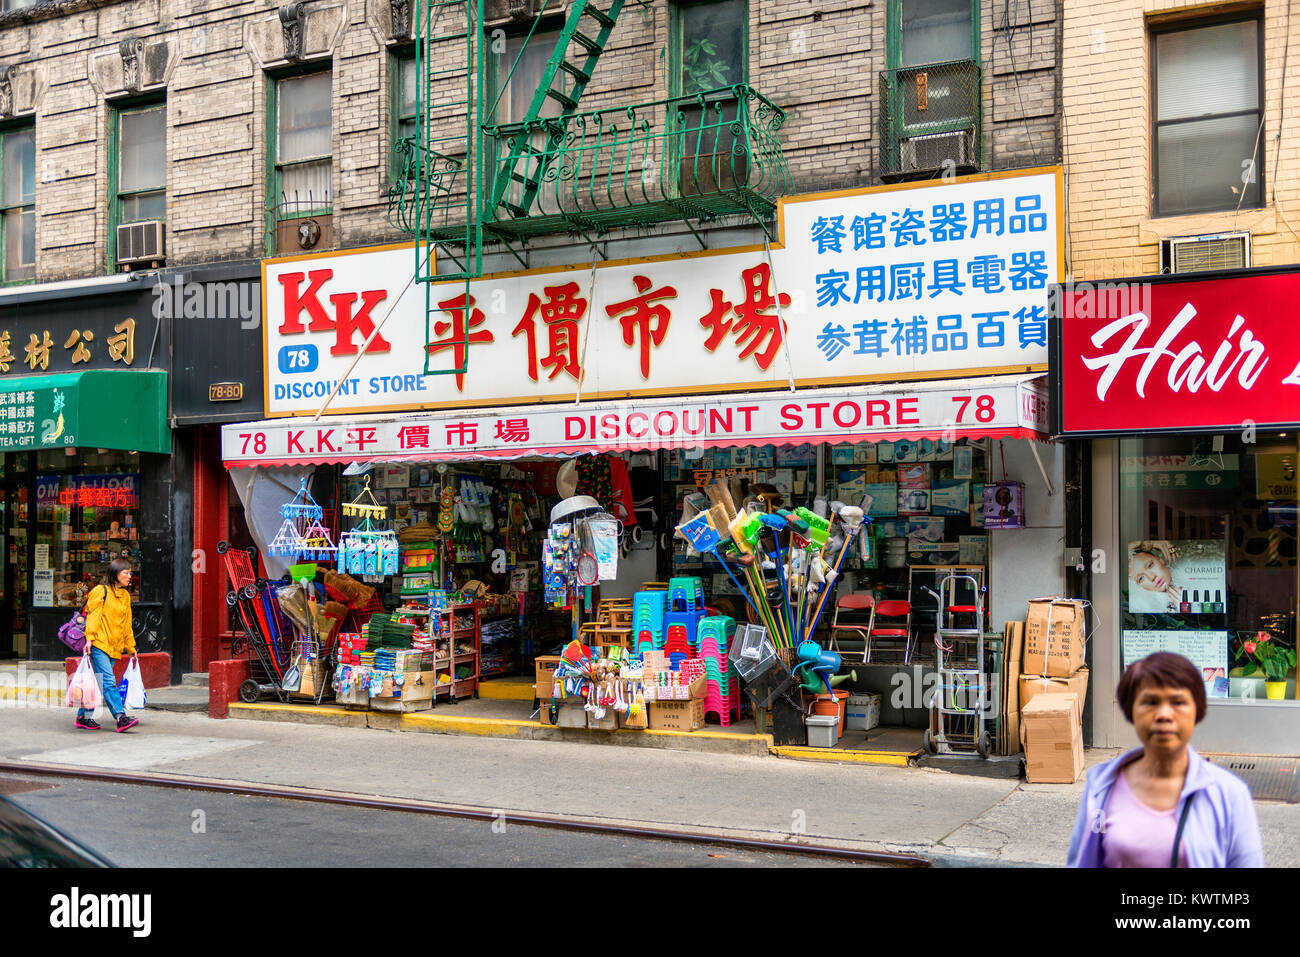 Discount Store in Chinatown, New York City, USA. Chinatown is home to the highest concentration of Chinese people in the Western Hemisphere. Stock Photo